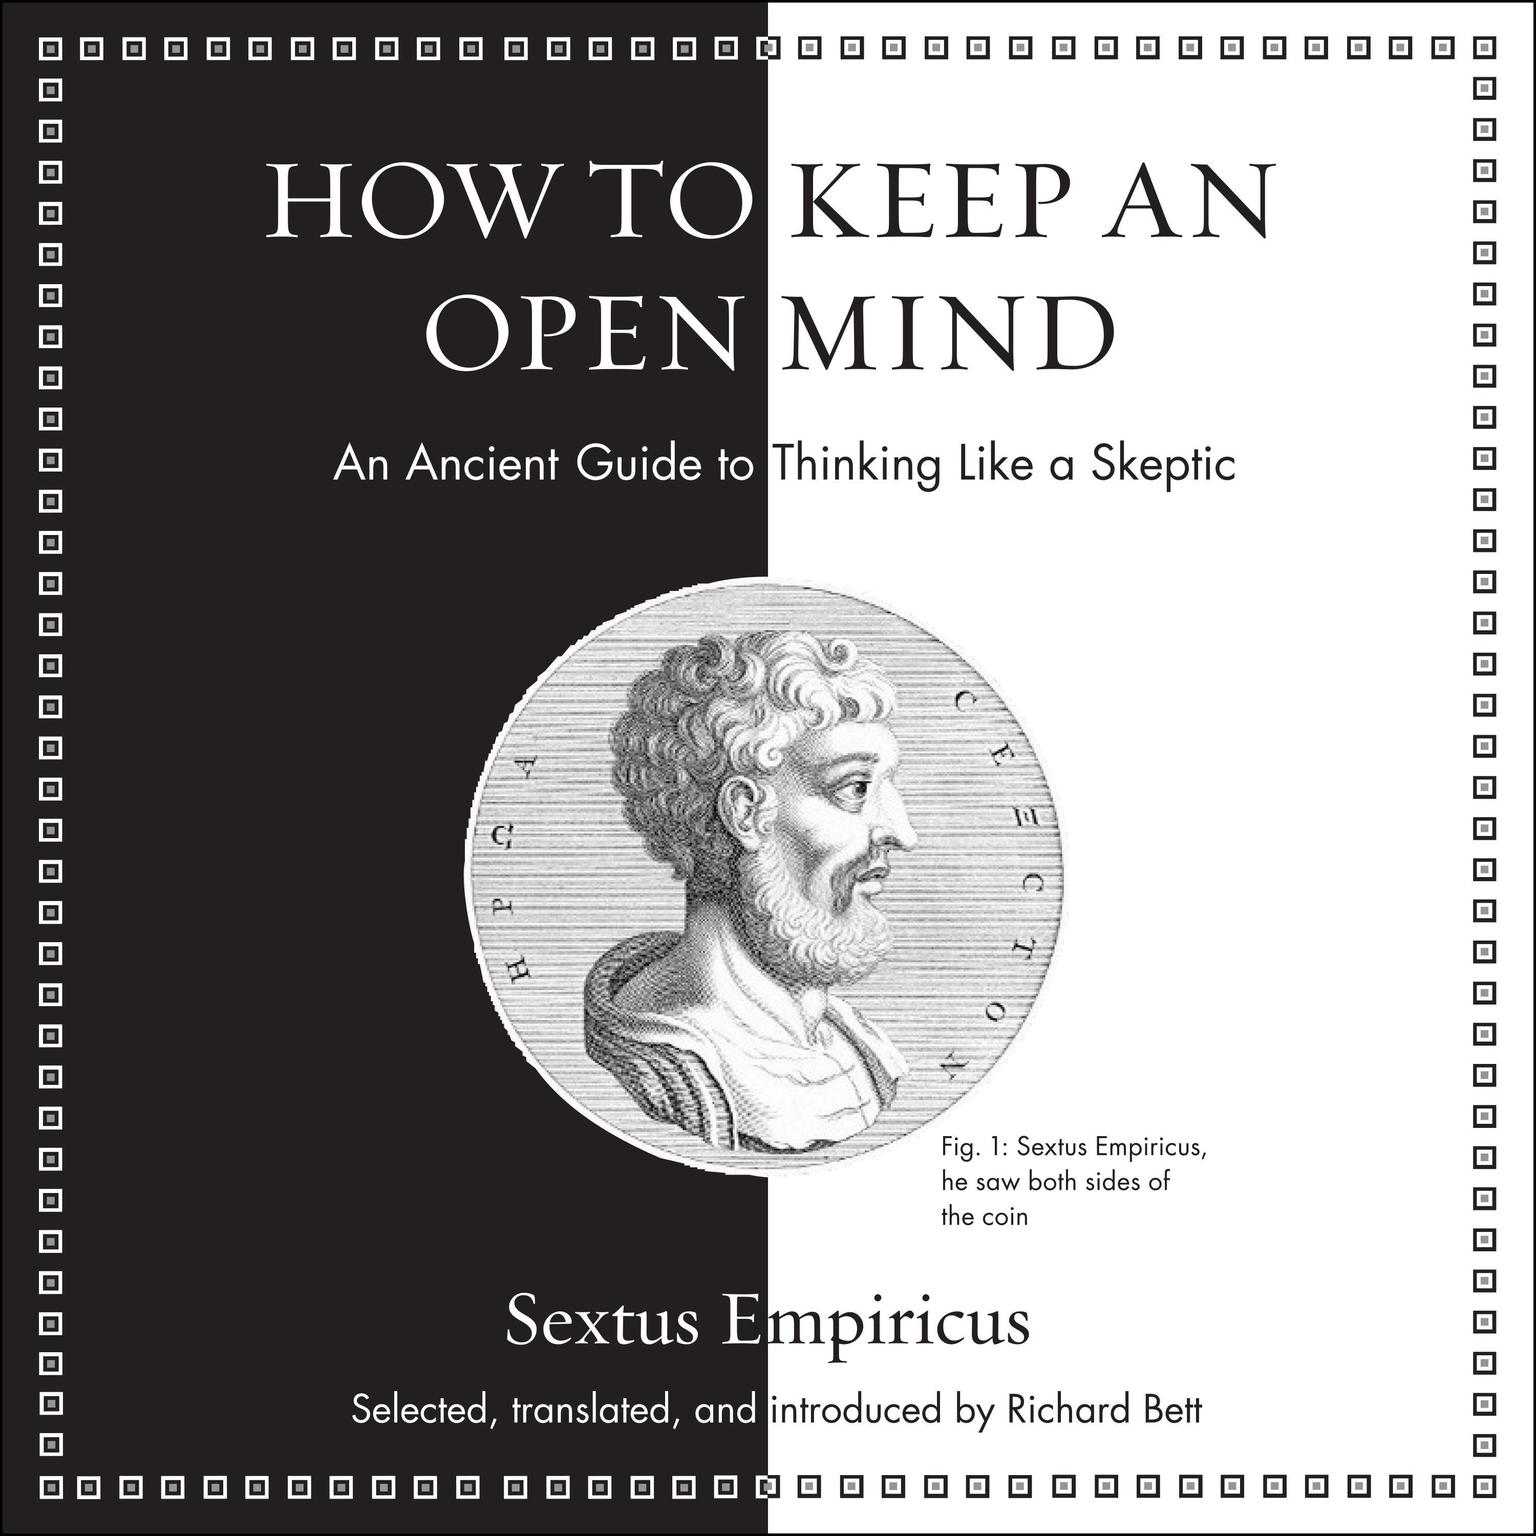 How to Keep an Open Mind: An Ancient Guide to Thinking Like a Skeptic Audiobook, by Sextus Empiricus